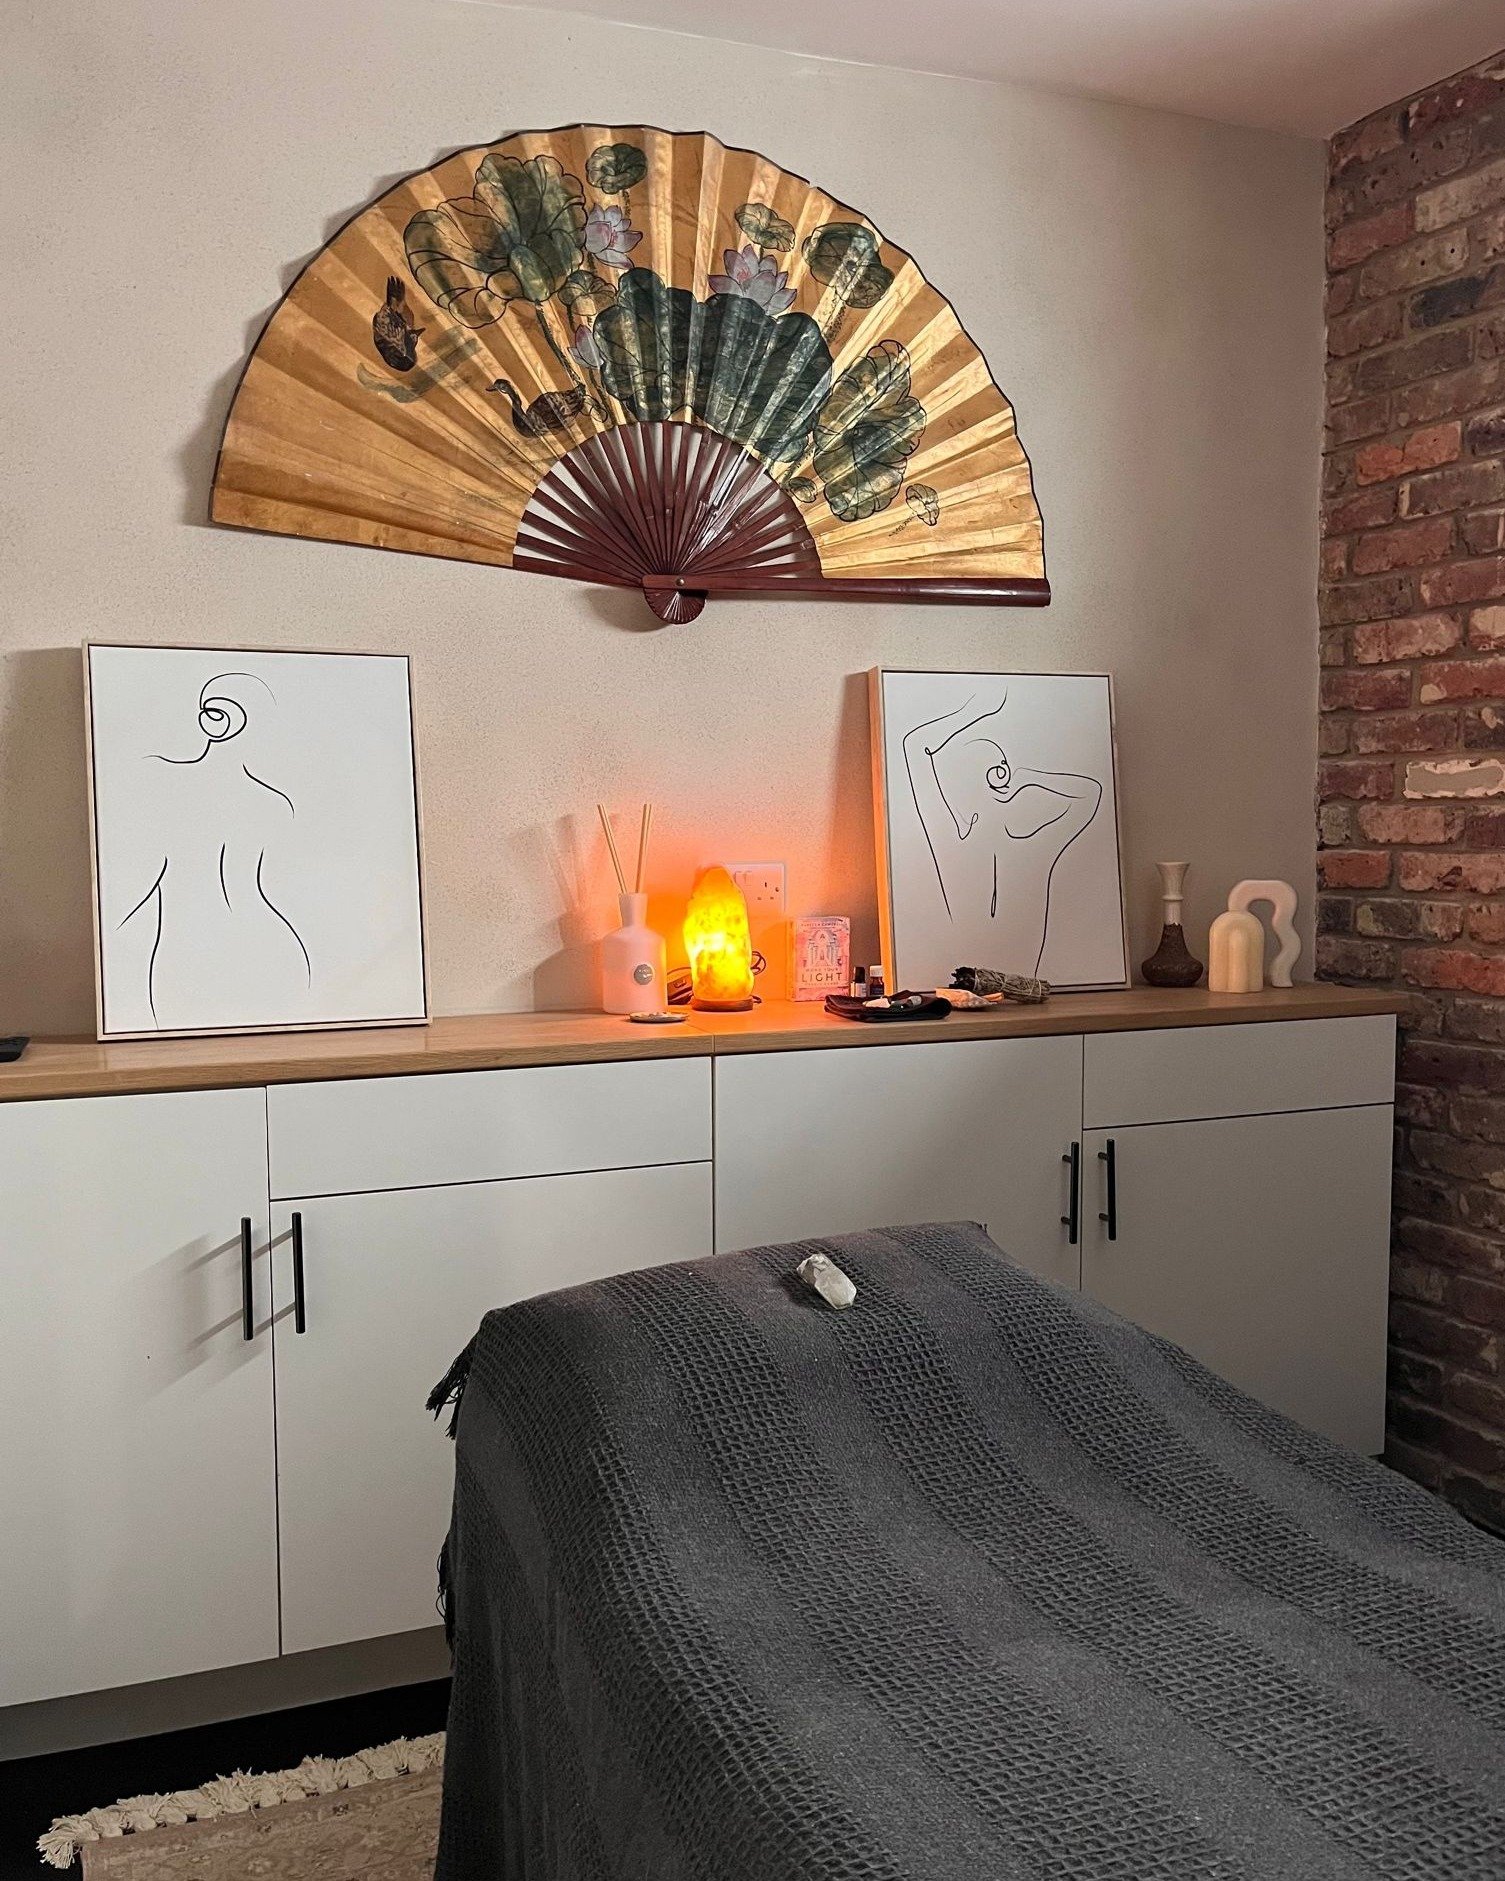 Unlock the transformative power of Reiki 🌟💛

Embrace a journey of inner peace and self-discovery every Tuesday from 11am to 6pm with our new holistic energy healing service led by @hereandnow.111 ✨

👉 Tailor your experience with flexible appointme